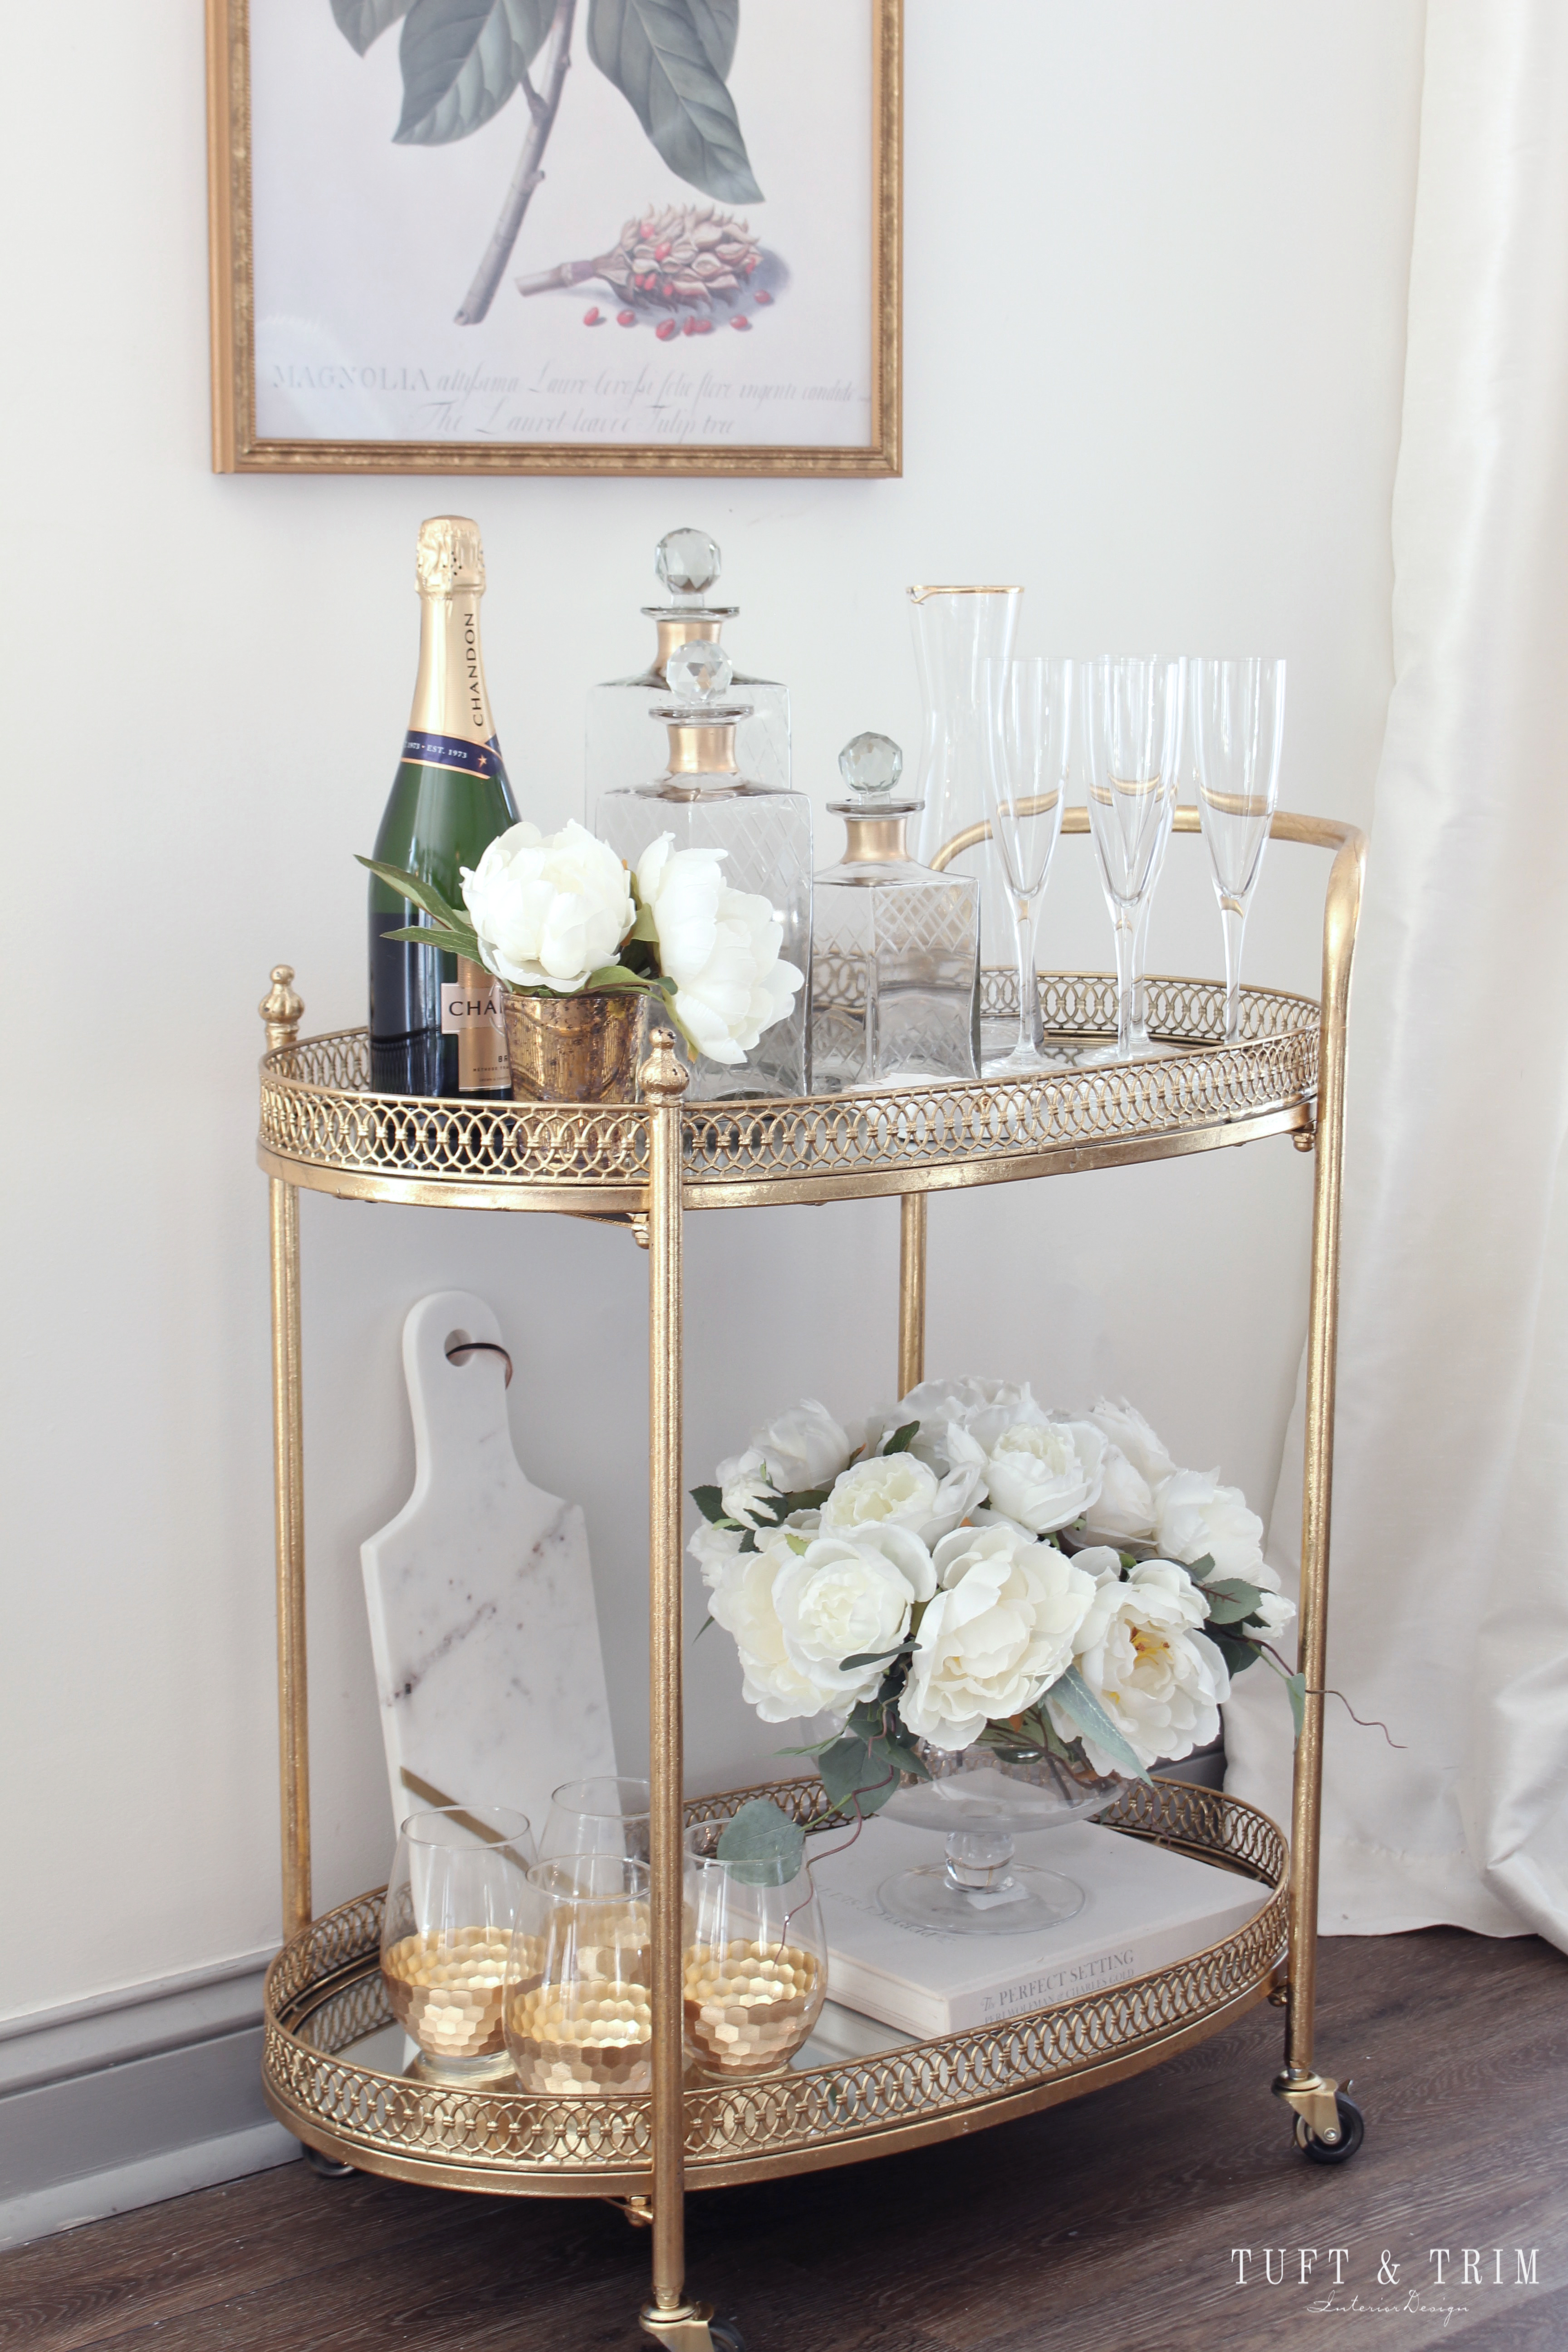 Bar Cart Styling Tips and Ideas with Tuft & Trim Interior Design